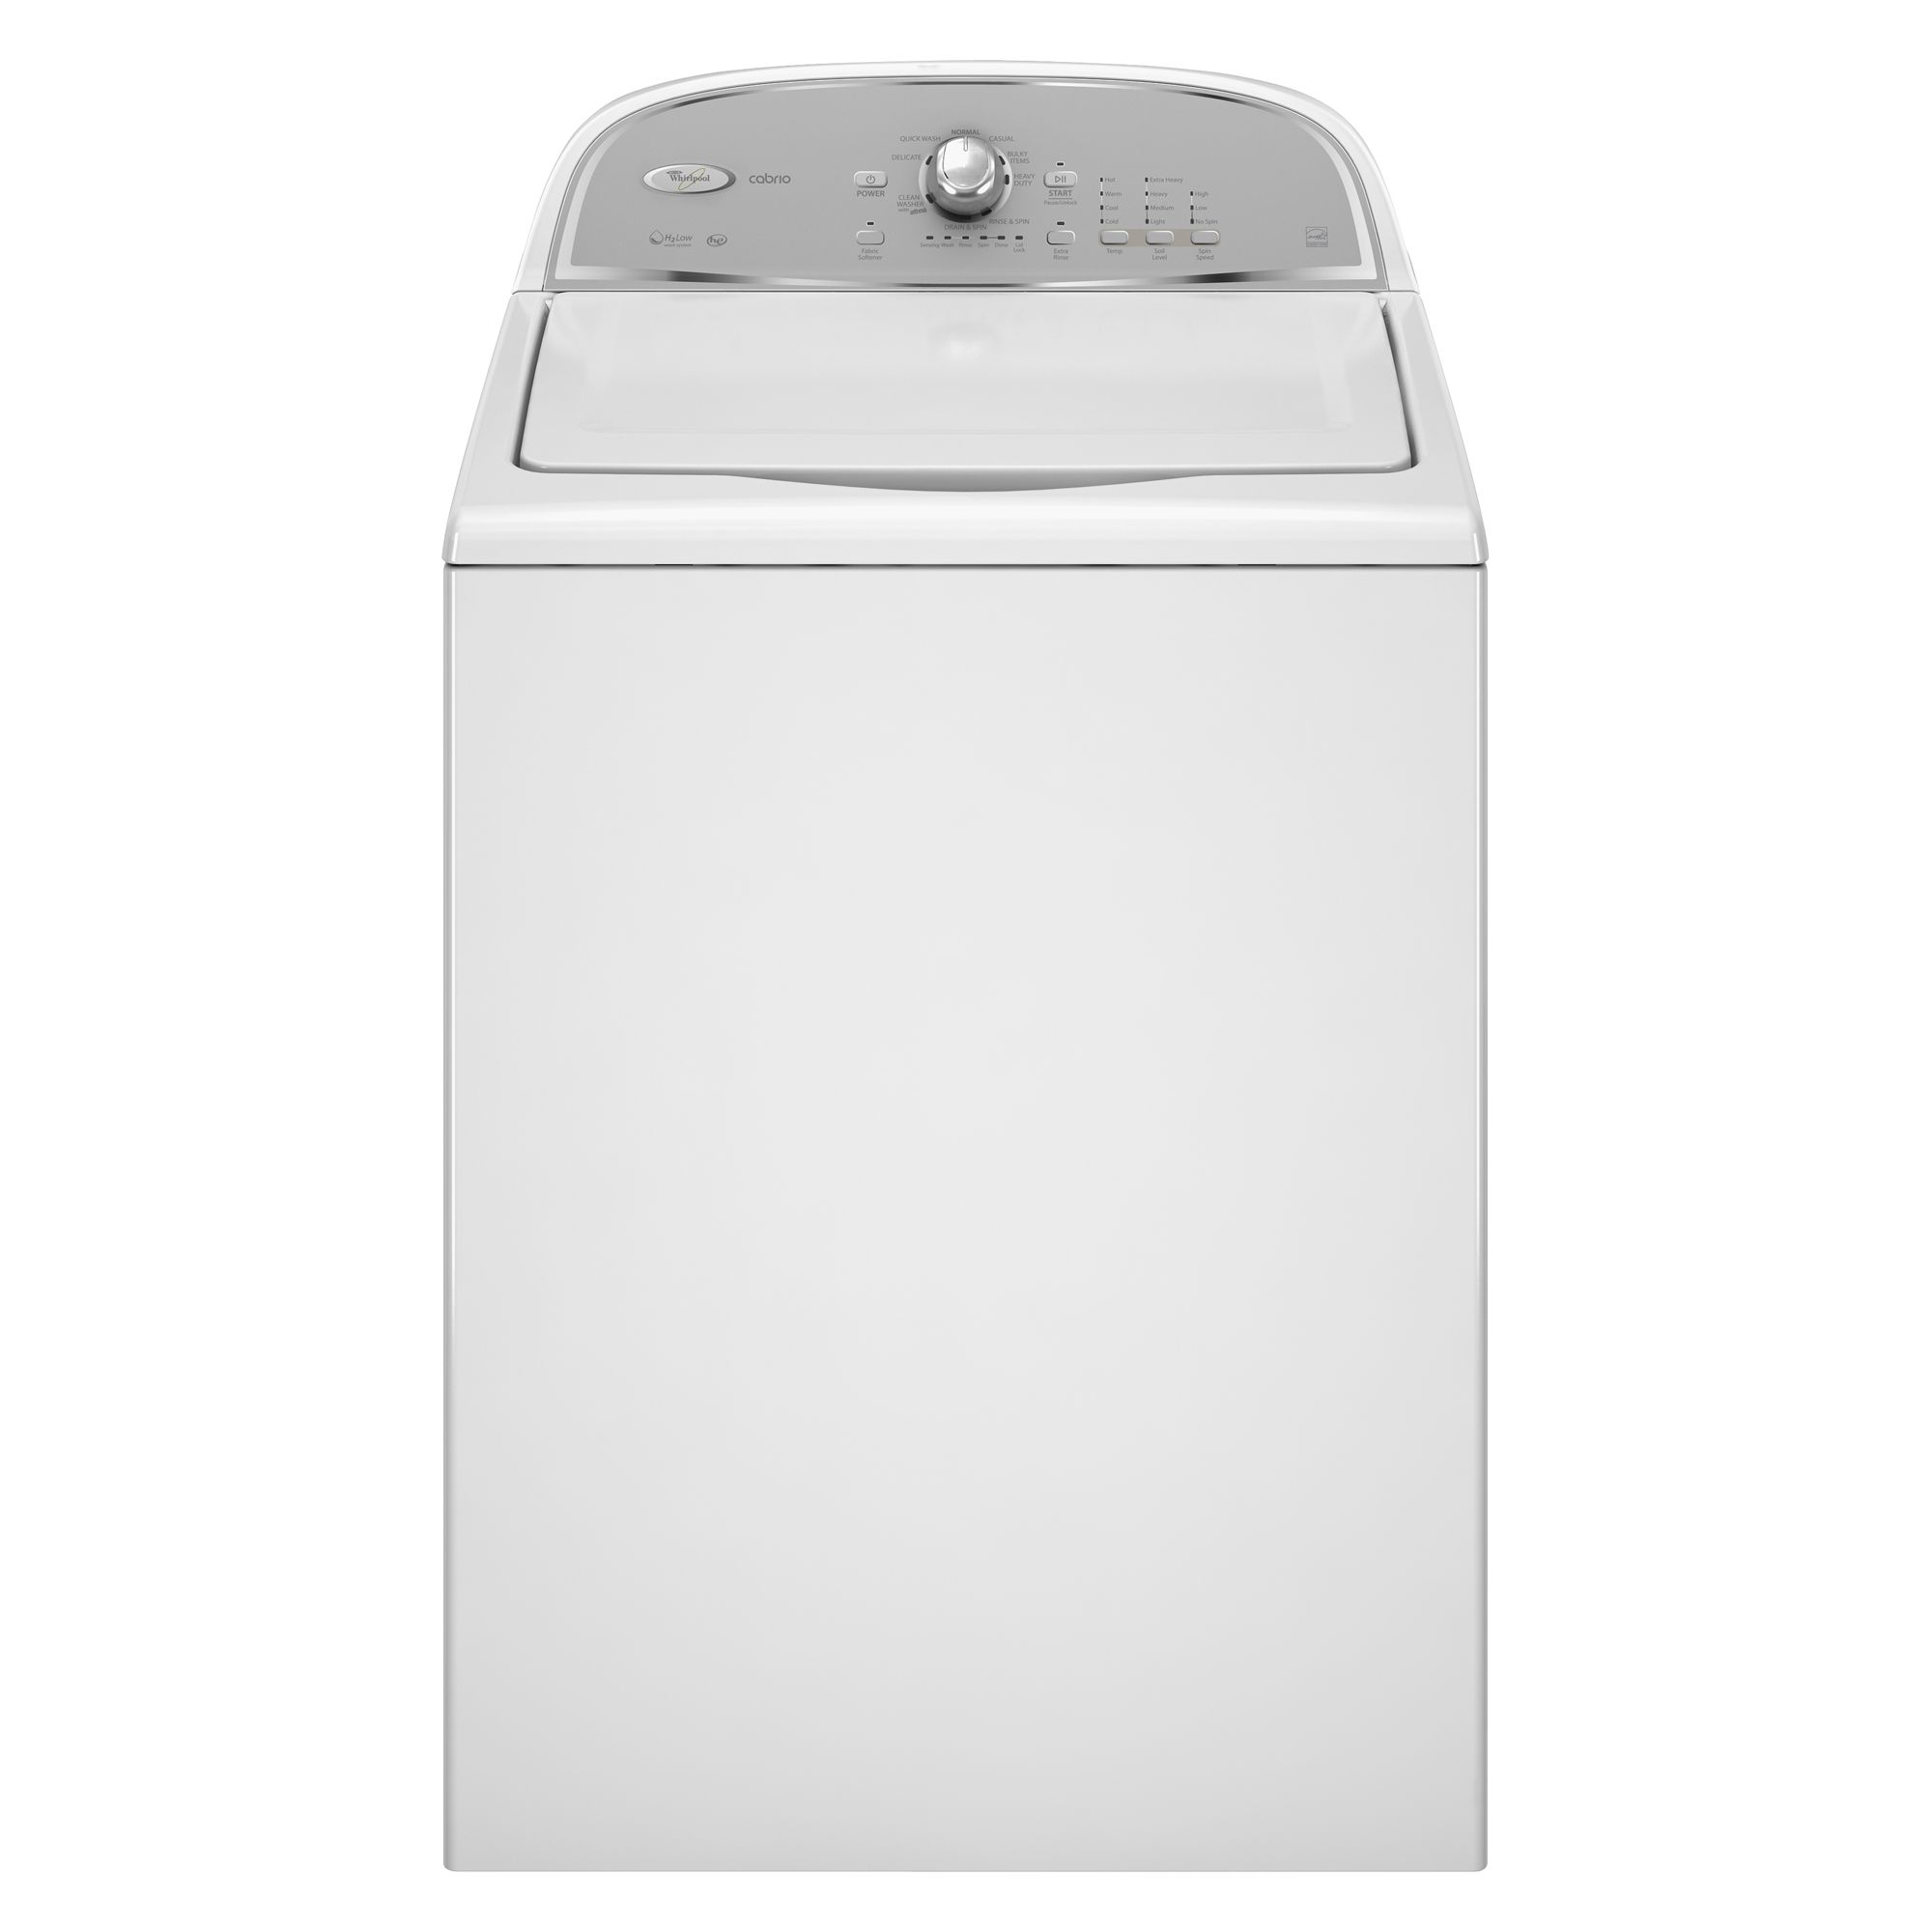 Whirlpool 3.6 cu. ft. Capacity Top-Load High-Efficiency Washer